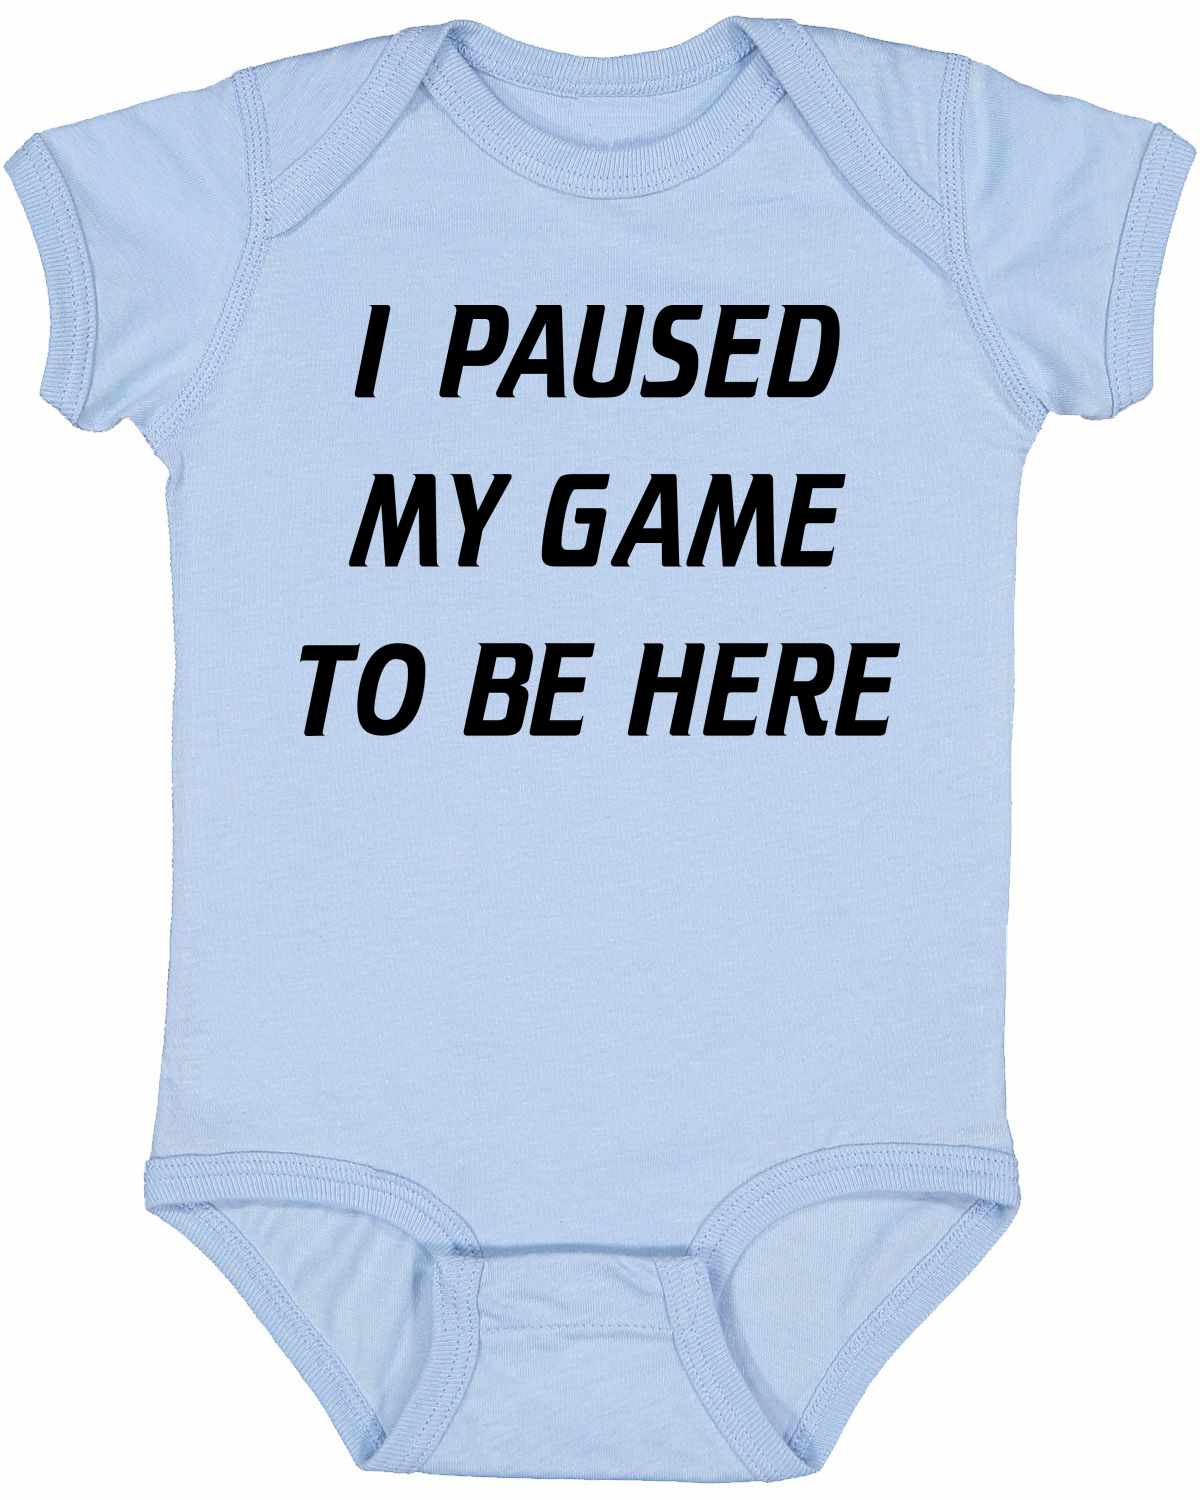 I Paused My Game to Be Here Infant BodySuit (#970-10)